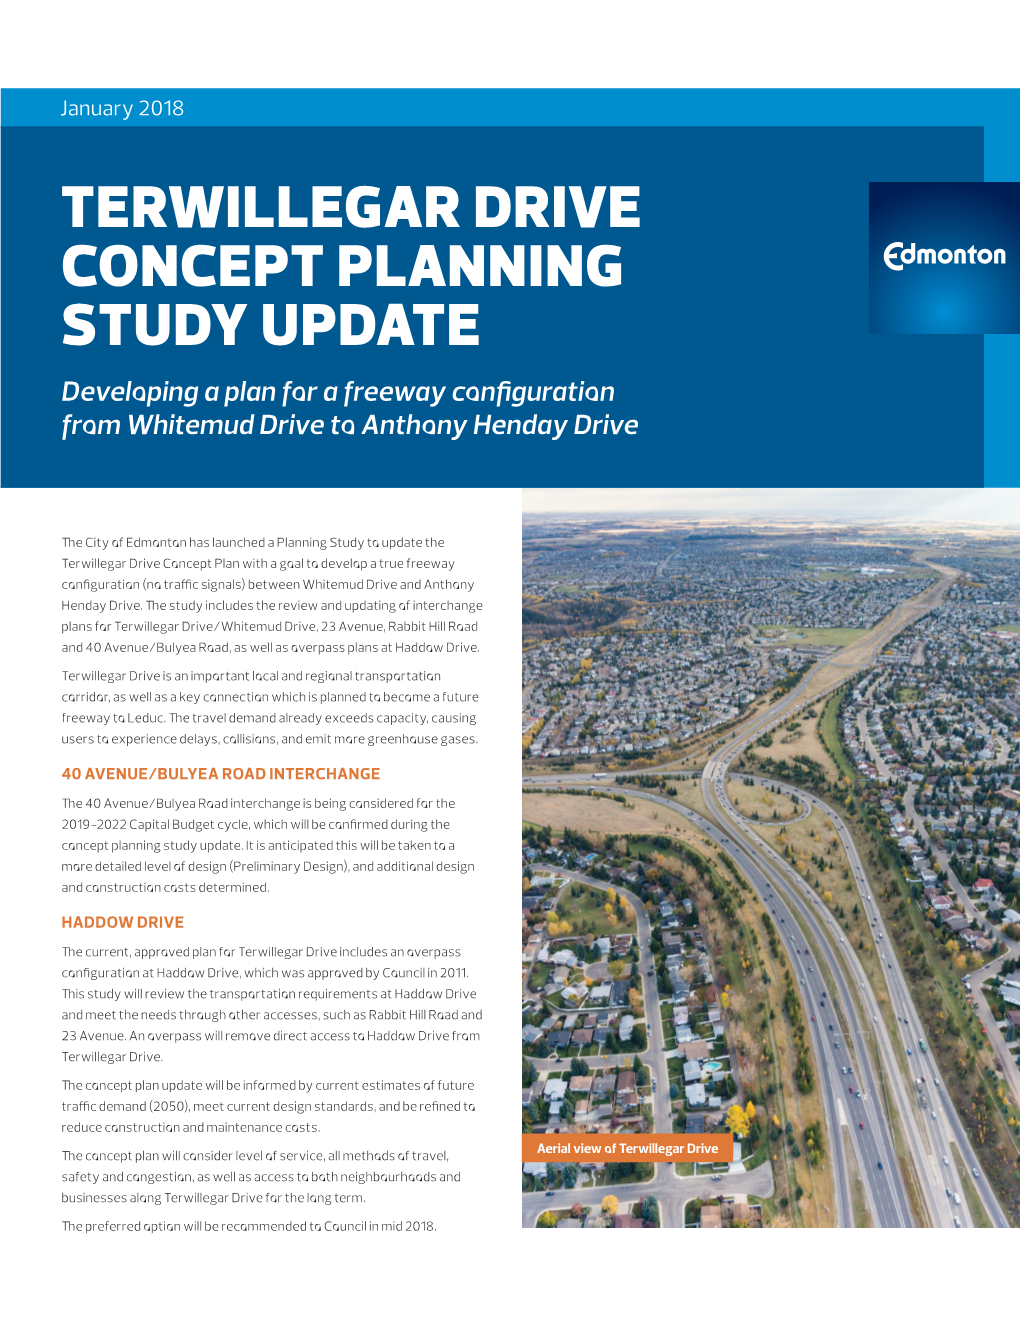 TERWILLEGAR DRIVE CONCEPT PLANNING STUDY UPDATE Developing a Plan for a Freeway Configuration from Whitemud Drive to Anthony Henday Drive